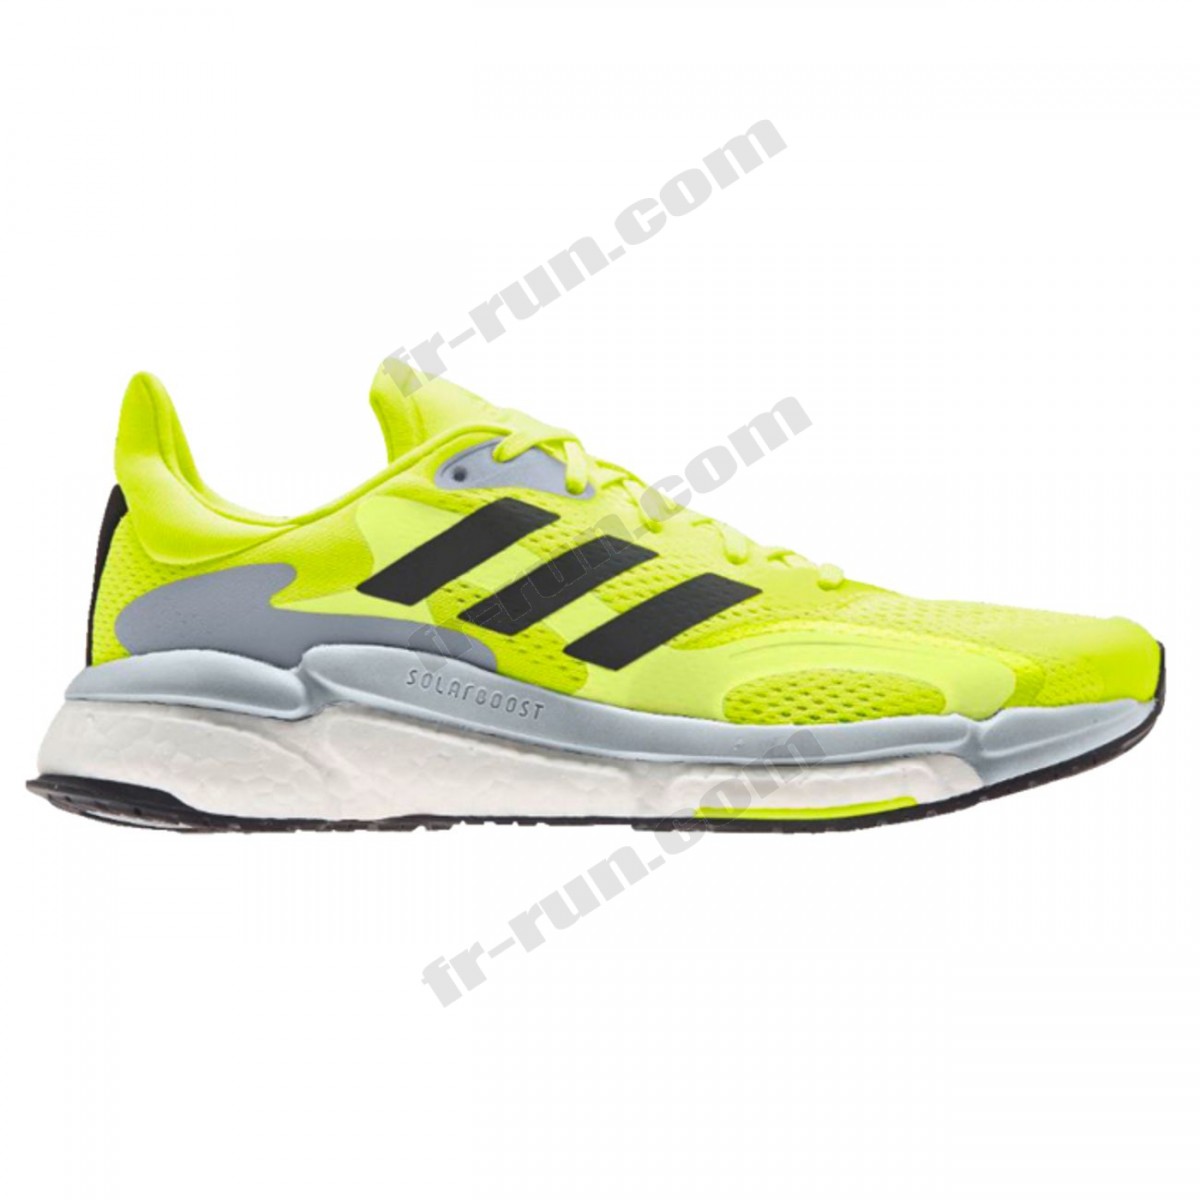 Adidas/CHAUSSURES BASSES running homme ADIDAS SOLAR BOOST 21 M √ Nouveau style √ Soldes - Adidas/CHAUSSURES BASSES running homme ADIDAS SOLAR BOOST 21 M √ Nouveau style √ Soldes